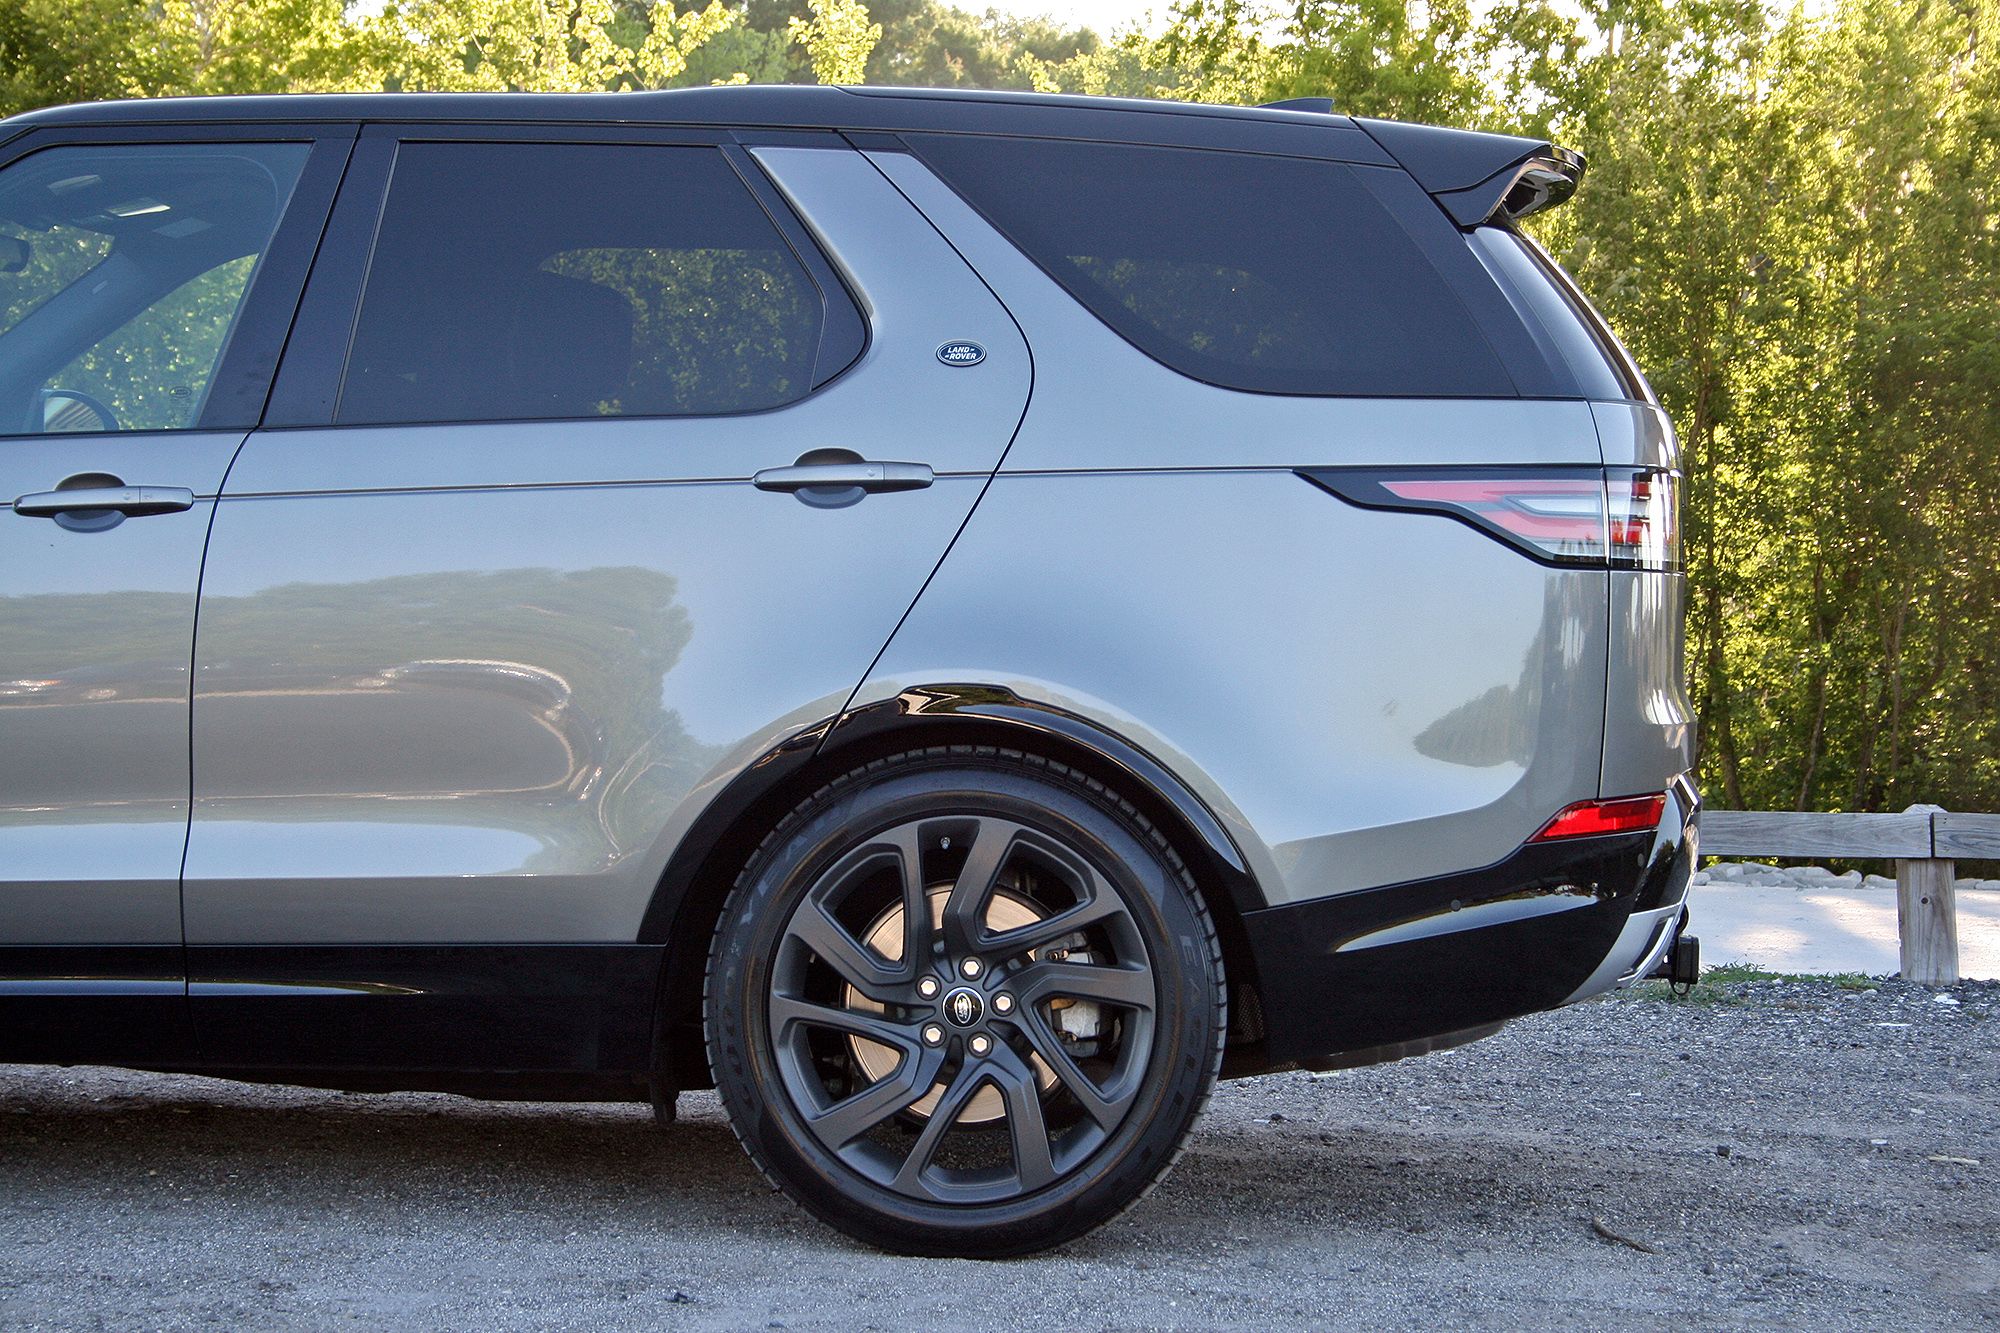 2017 Land Rover Discovery – Driven